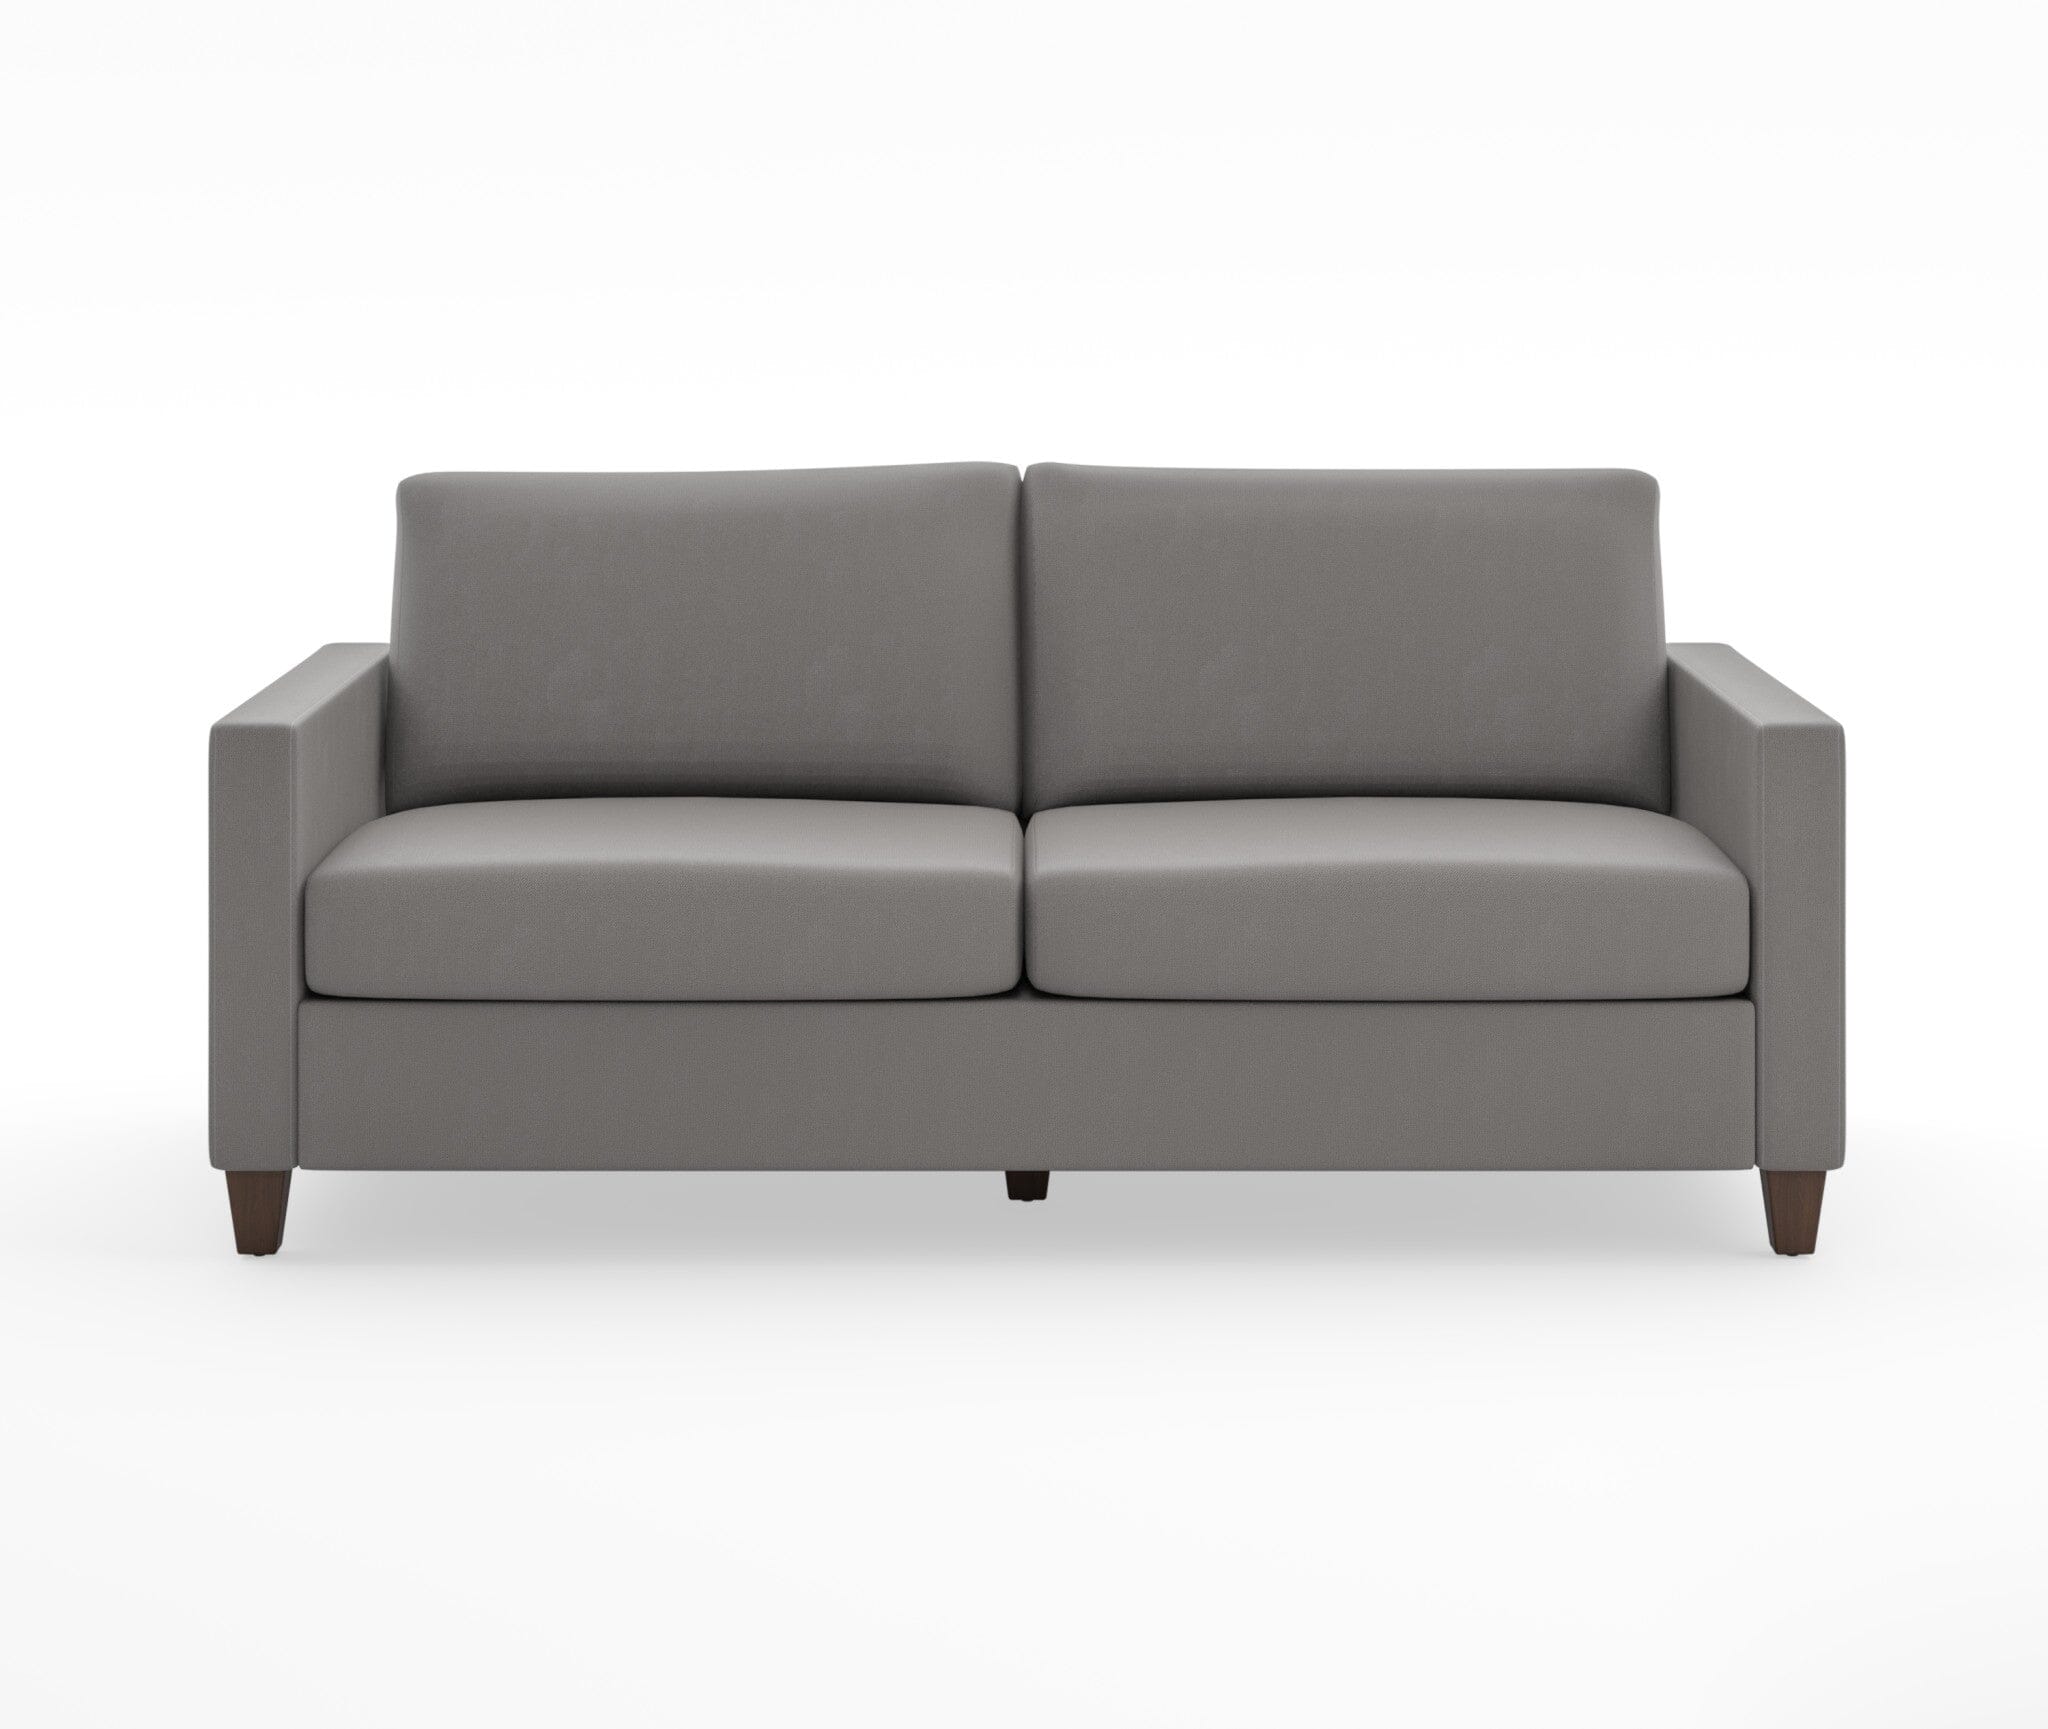 Transitional Sofa By Dylan Sofa Dylan